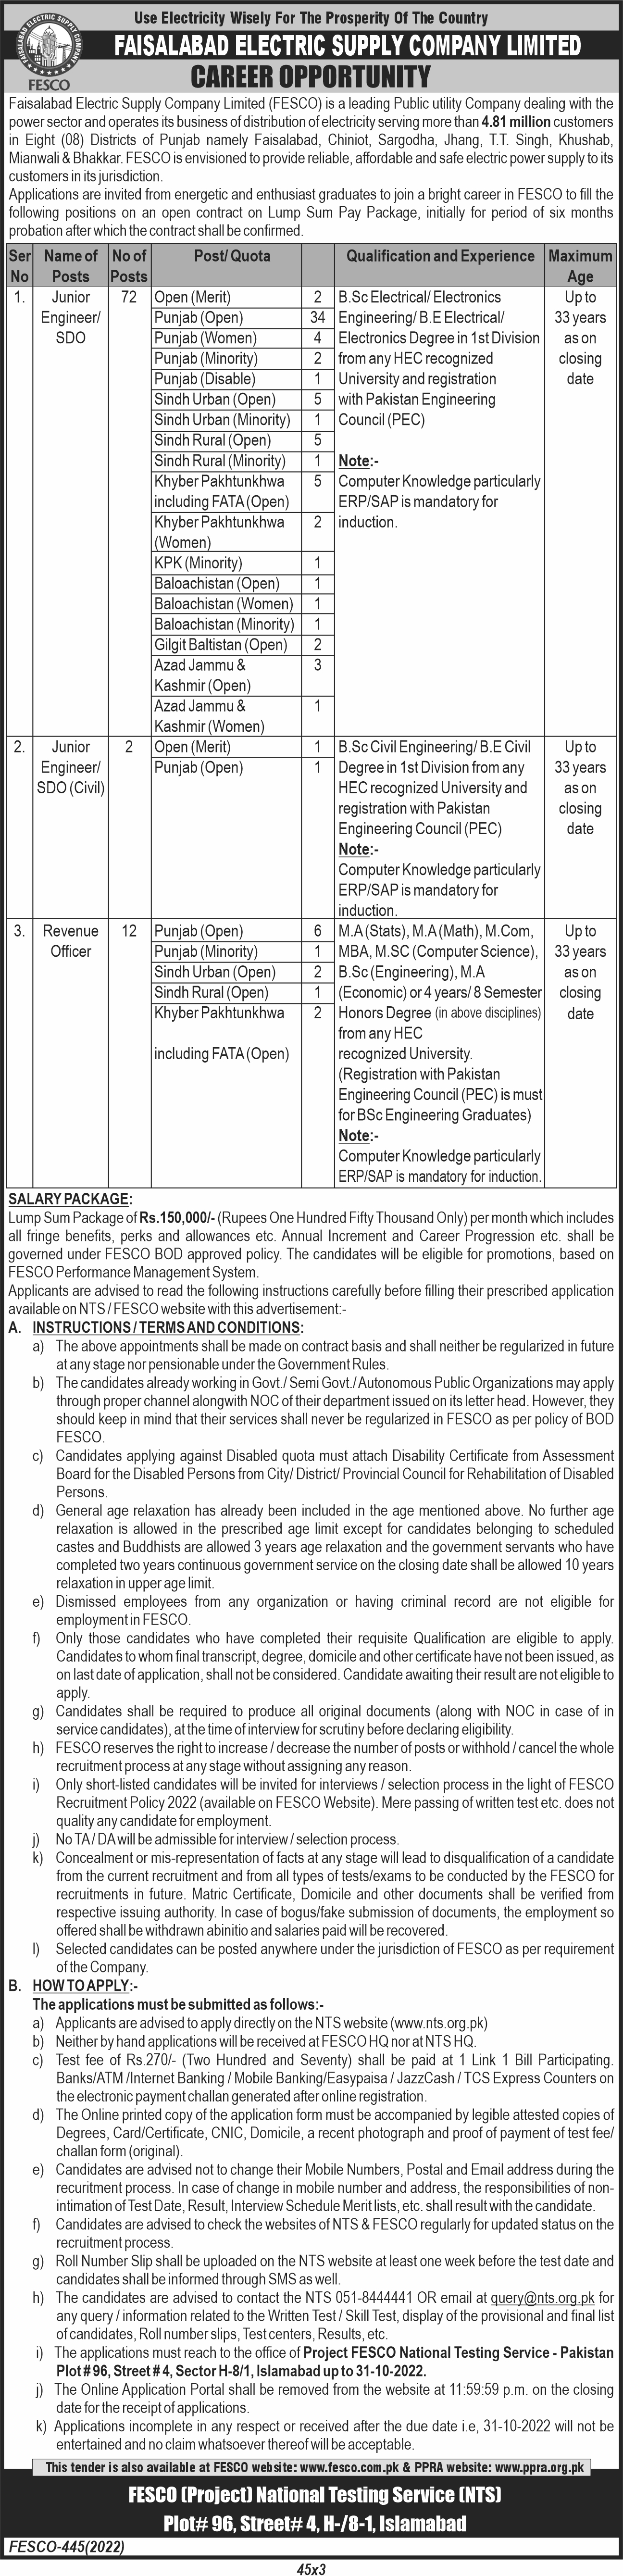 Faisalabad Electric Supply Company Limited (FESCO) Latest Jobs October 2022 | Apply Online